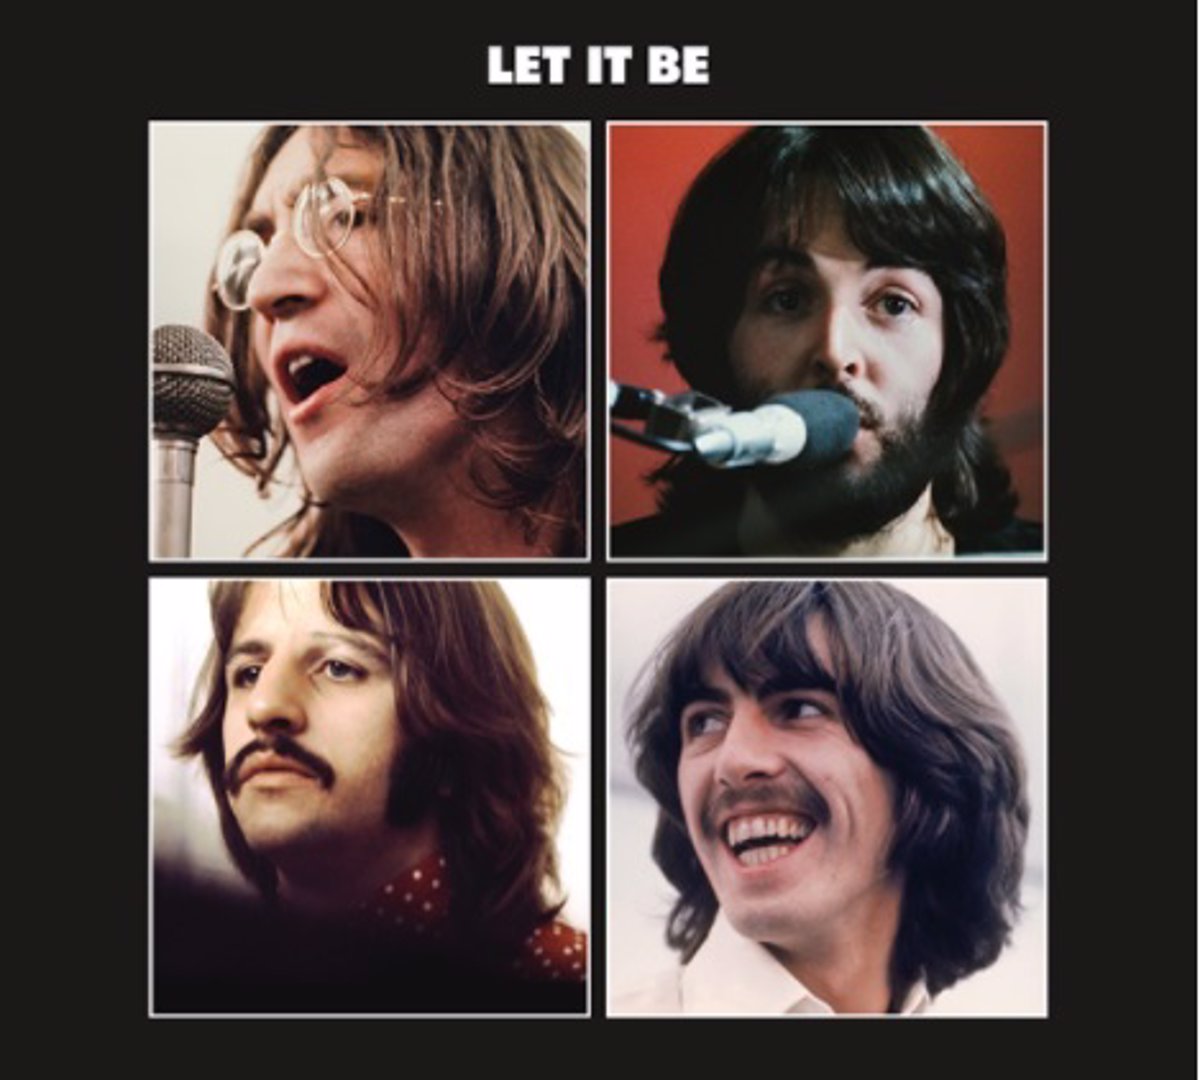 Get Back ‘, a book and a new edition of’ Let it be ‘commemorate the 50th anniversary of the album